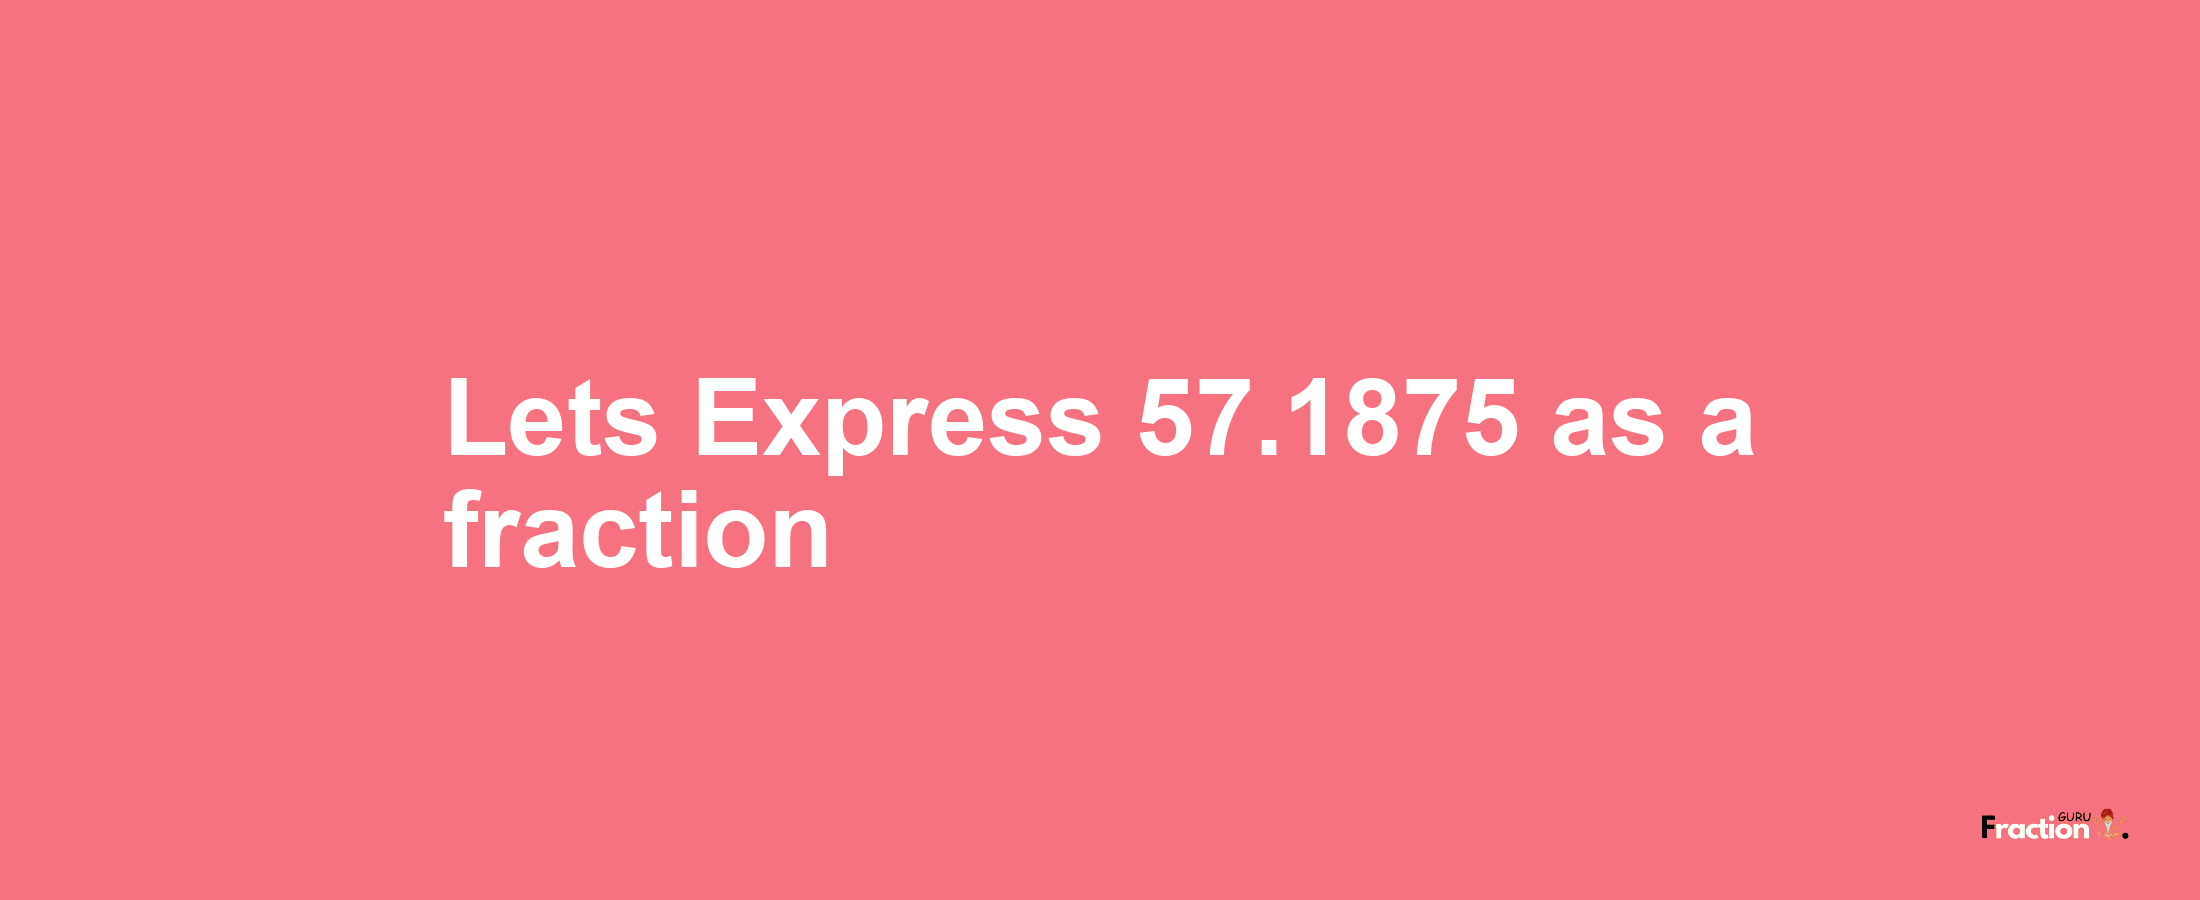 Lets Express 57.1875 as afraction